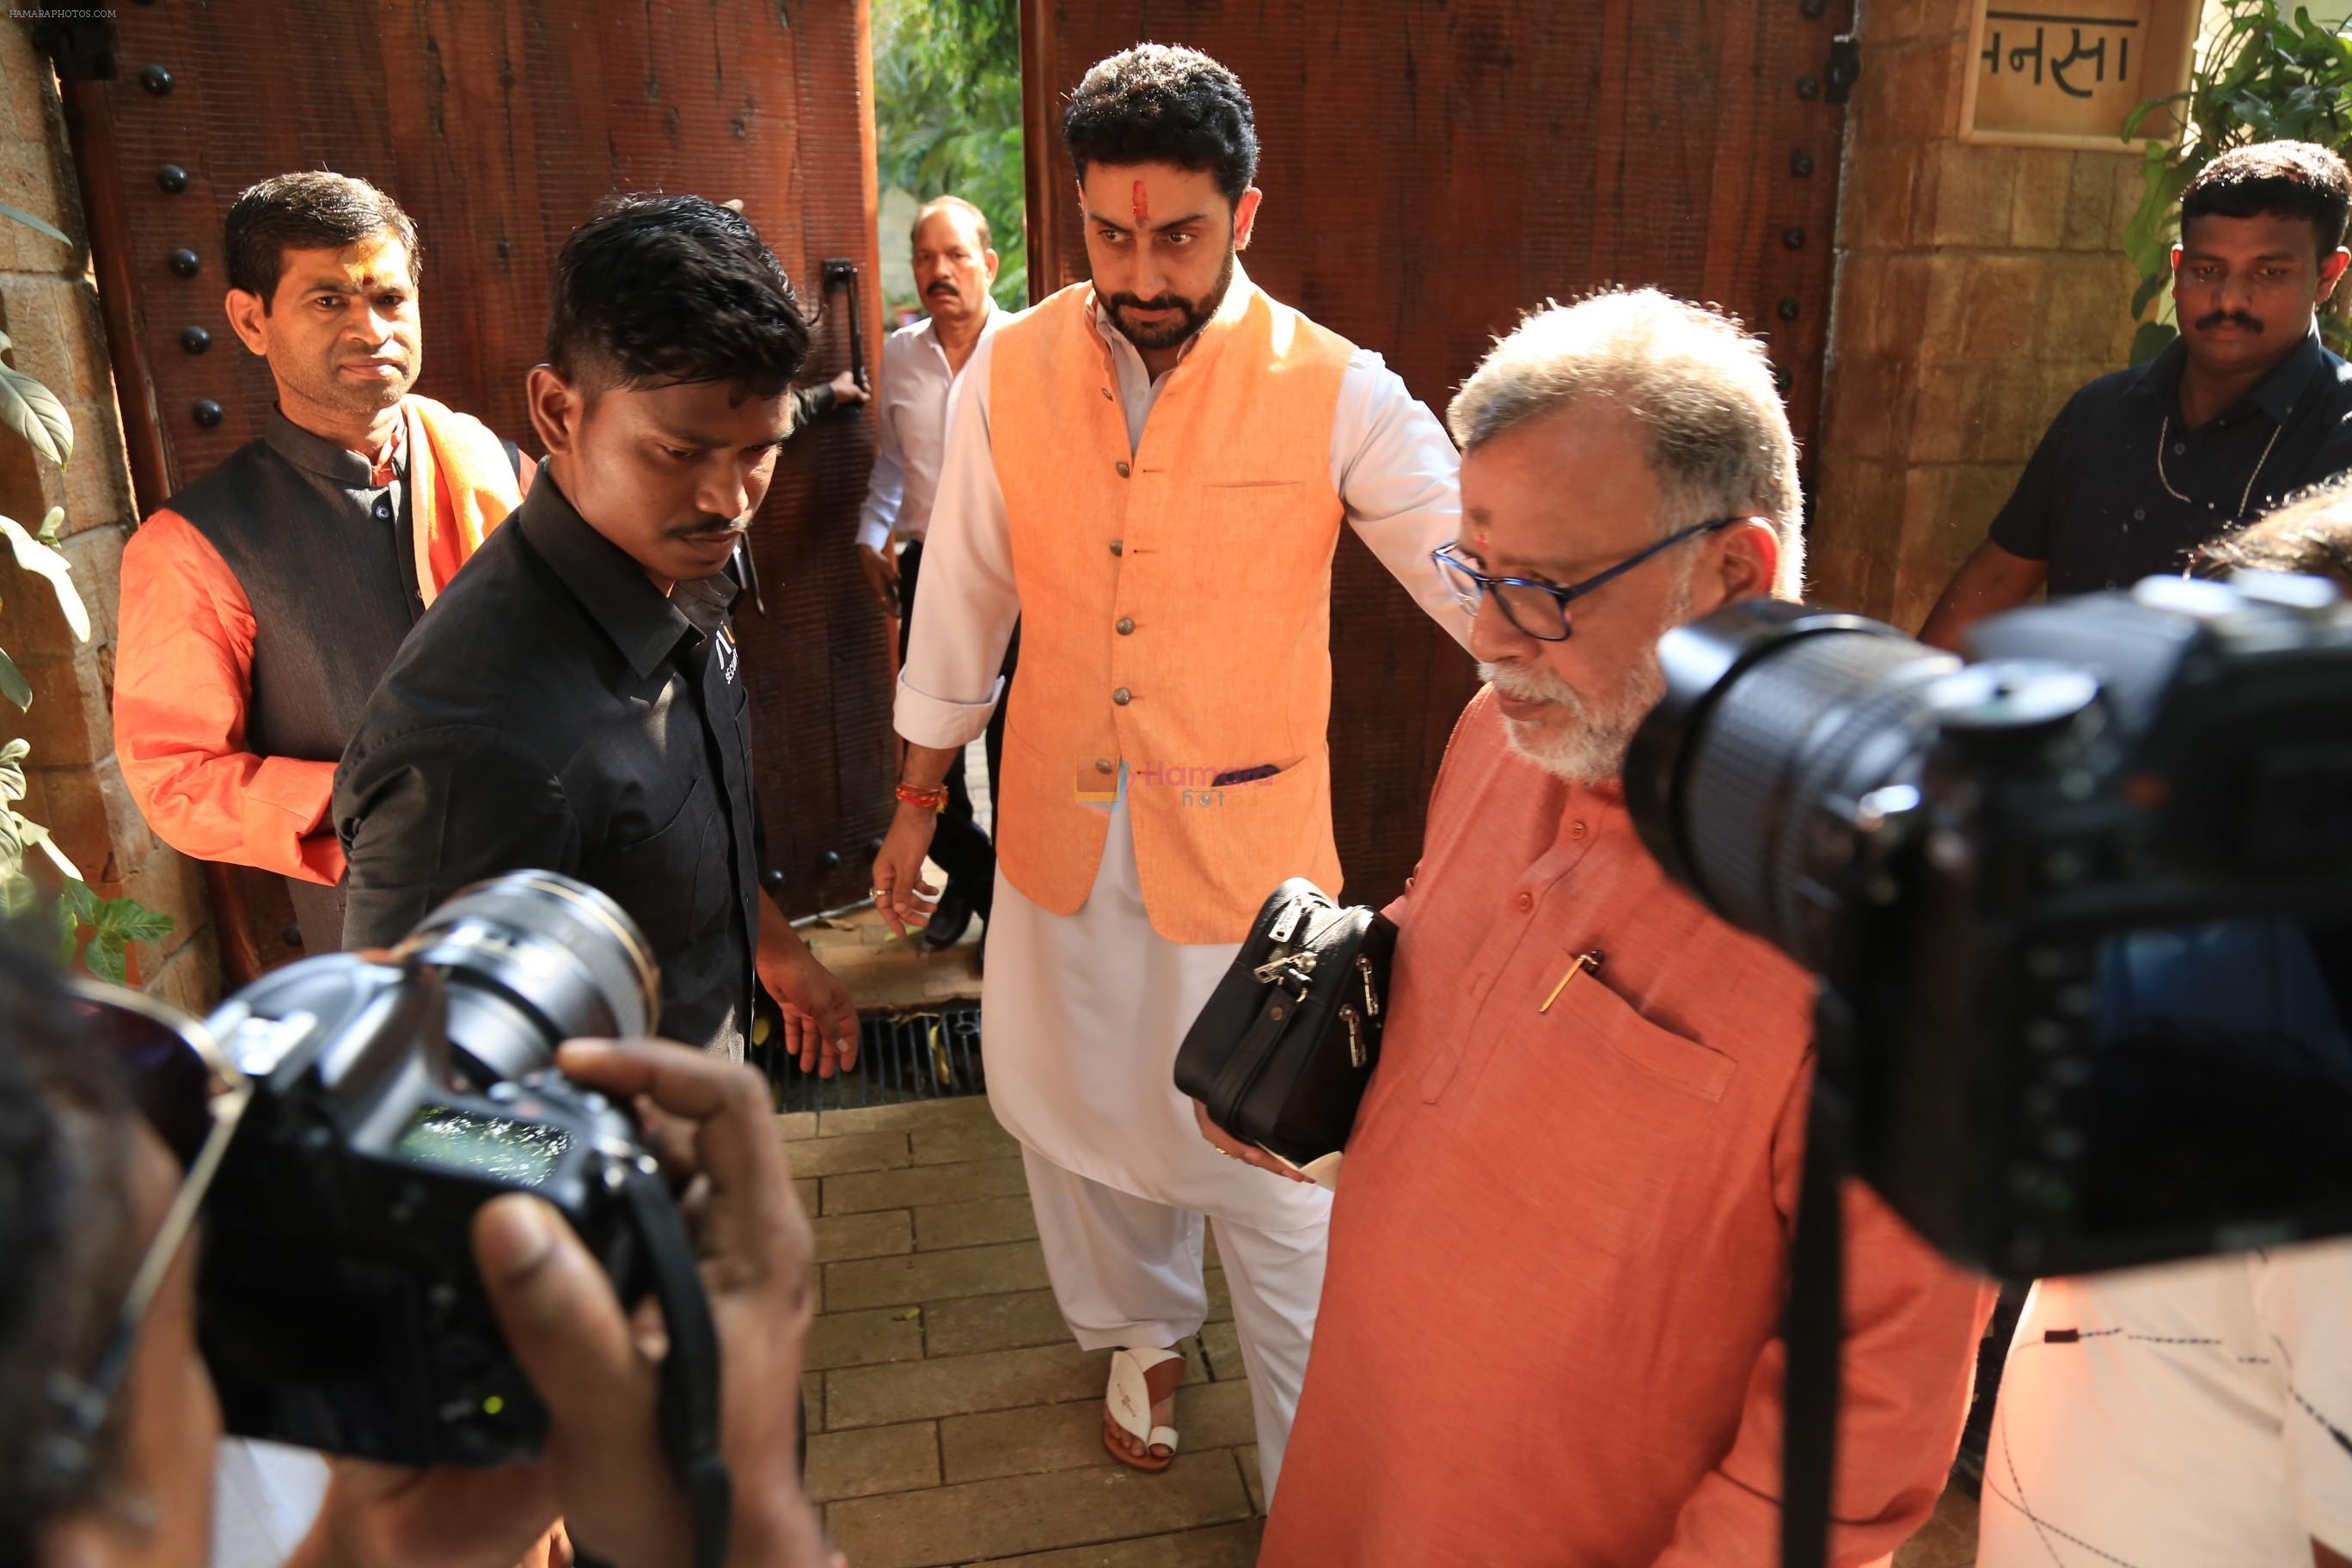 Abhishek Bachchan, Amitabh Bachchan meets his fans outside his juhu residence on the occasion of his birthday on 10th Oct 2018